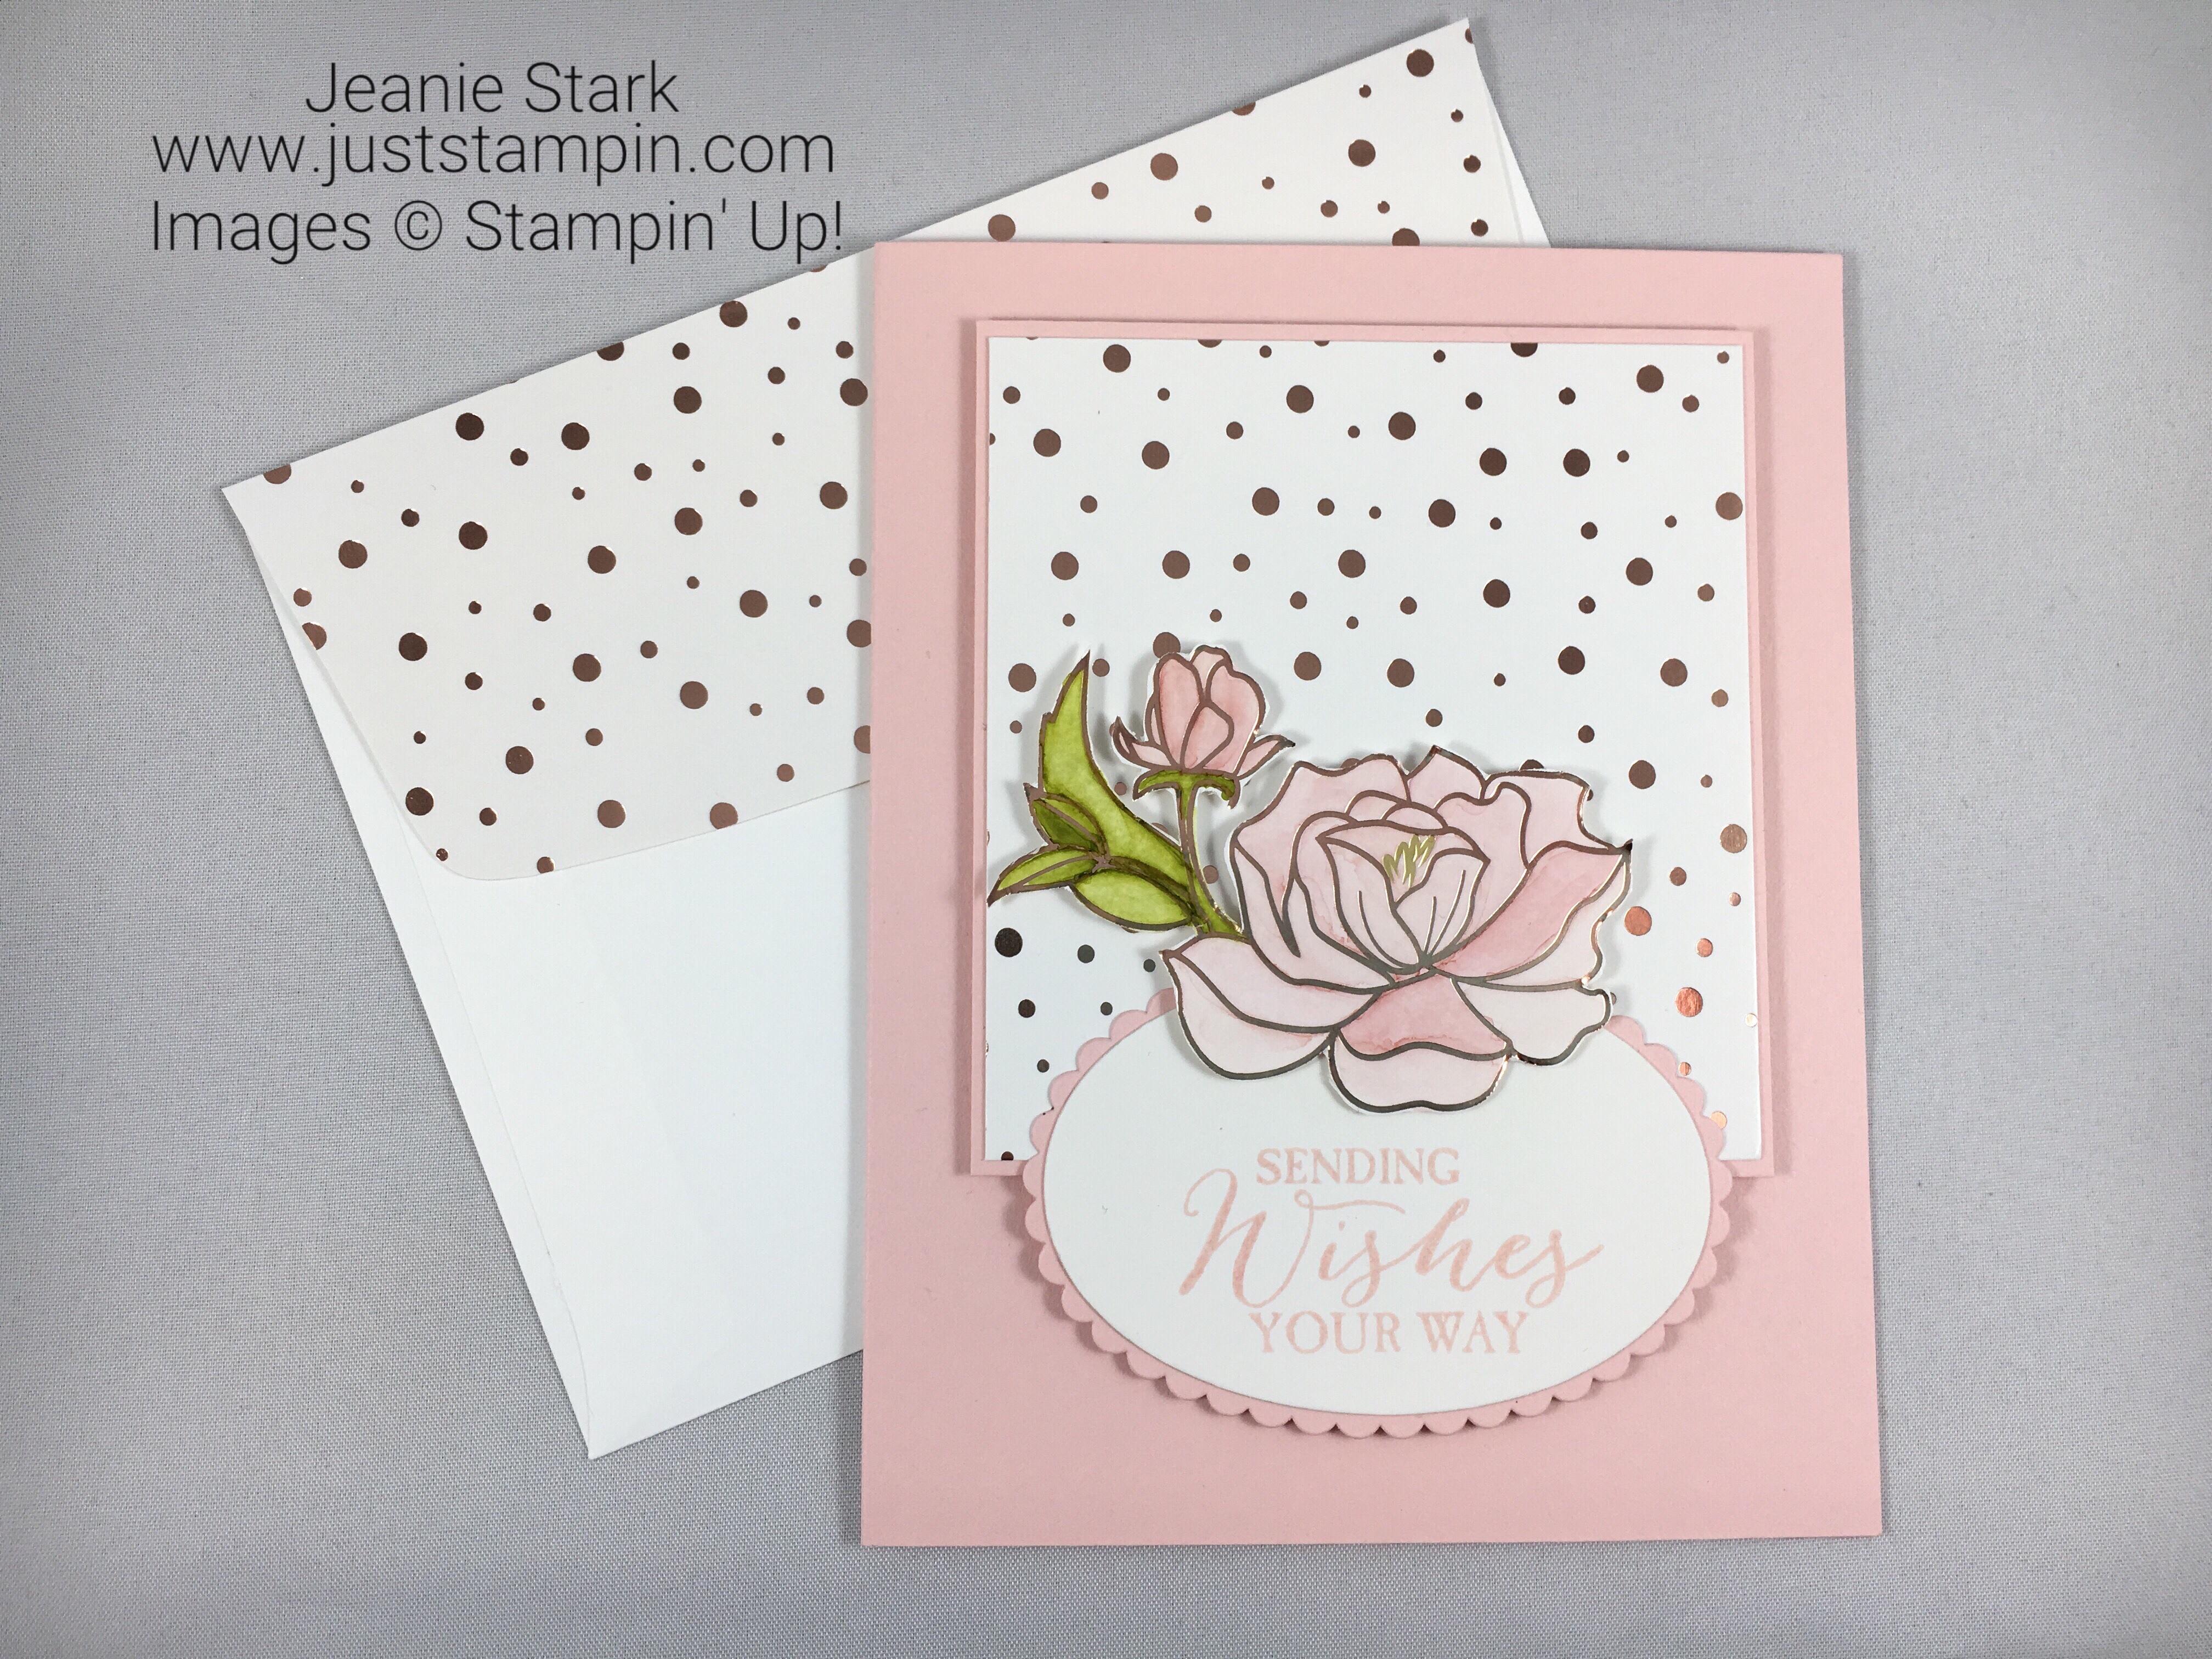 Stampin Up Butterfly Basics Stamp Set and Springtime Foils Specialty Designer Series Paper Birthday card idea - Jeanie Stark StampinUp